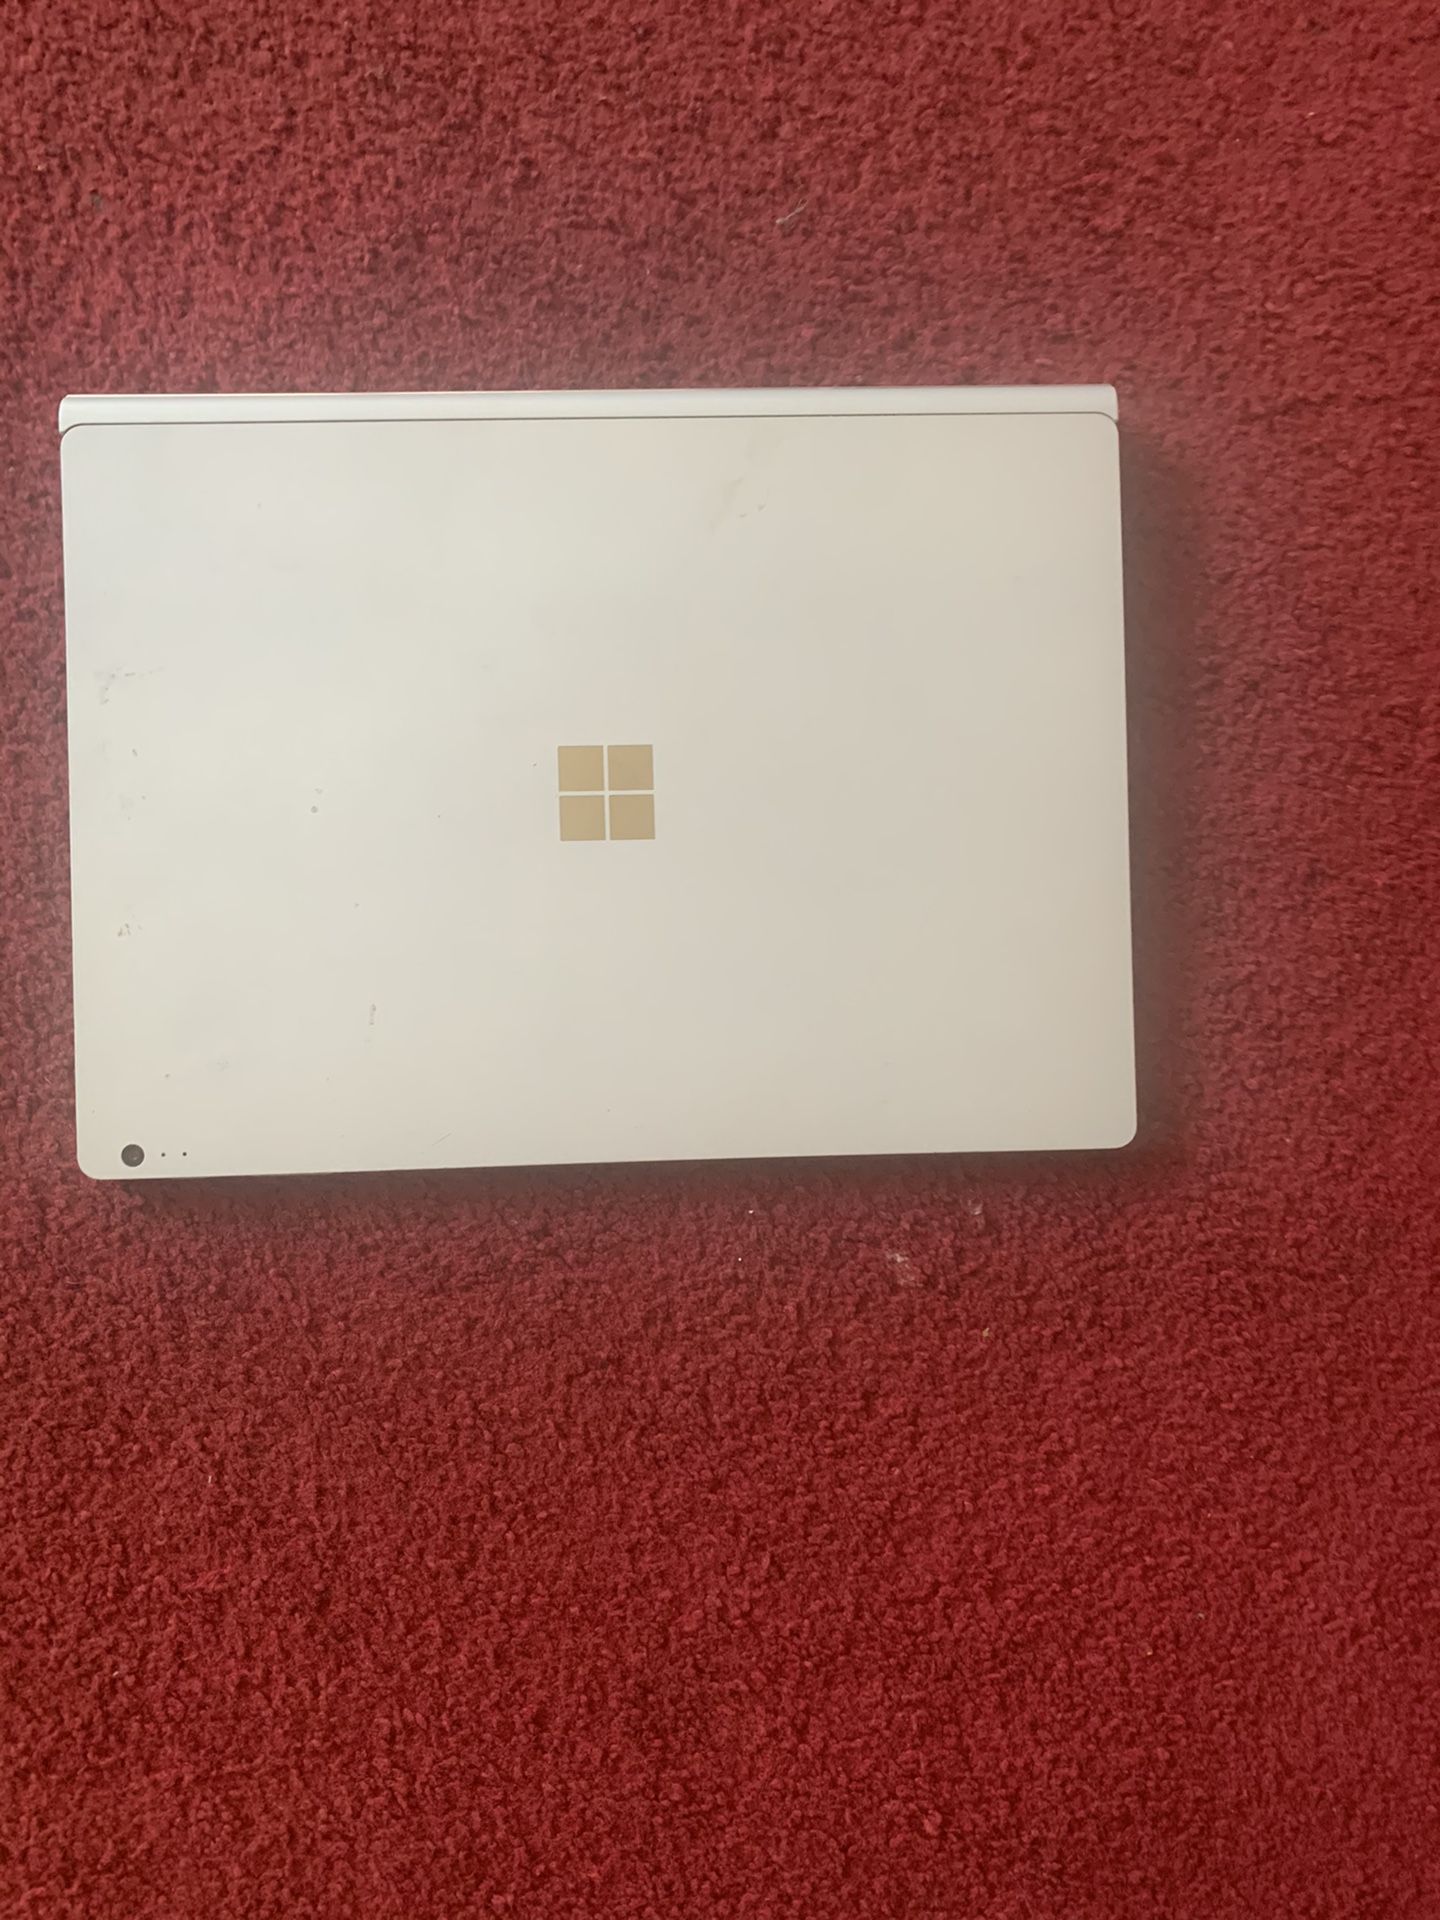 Surface book 1. 13.5inch i5